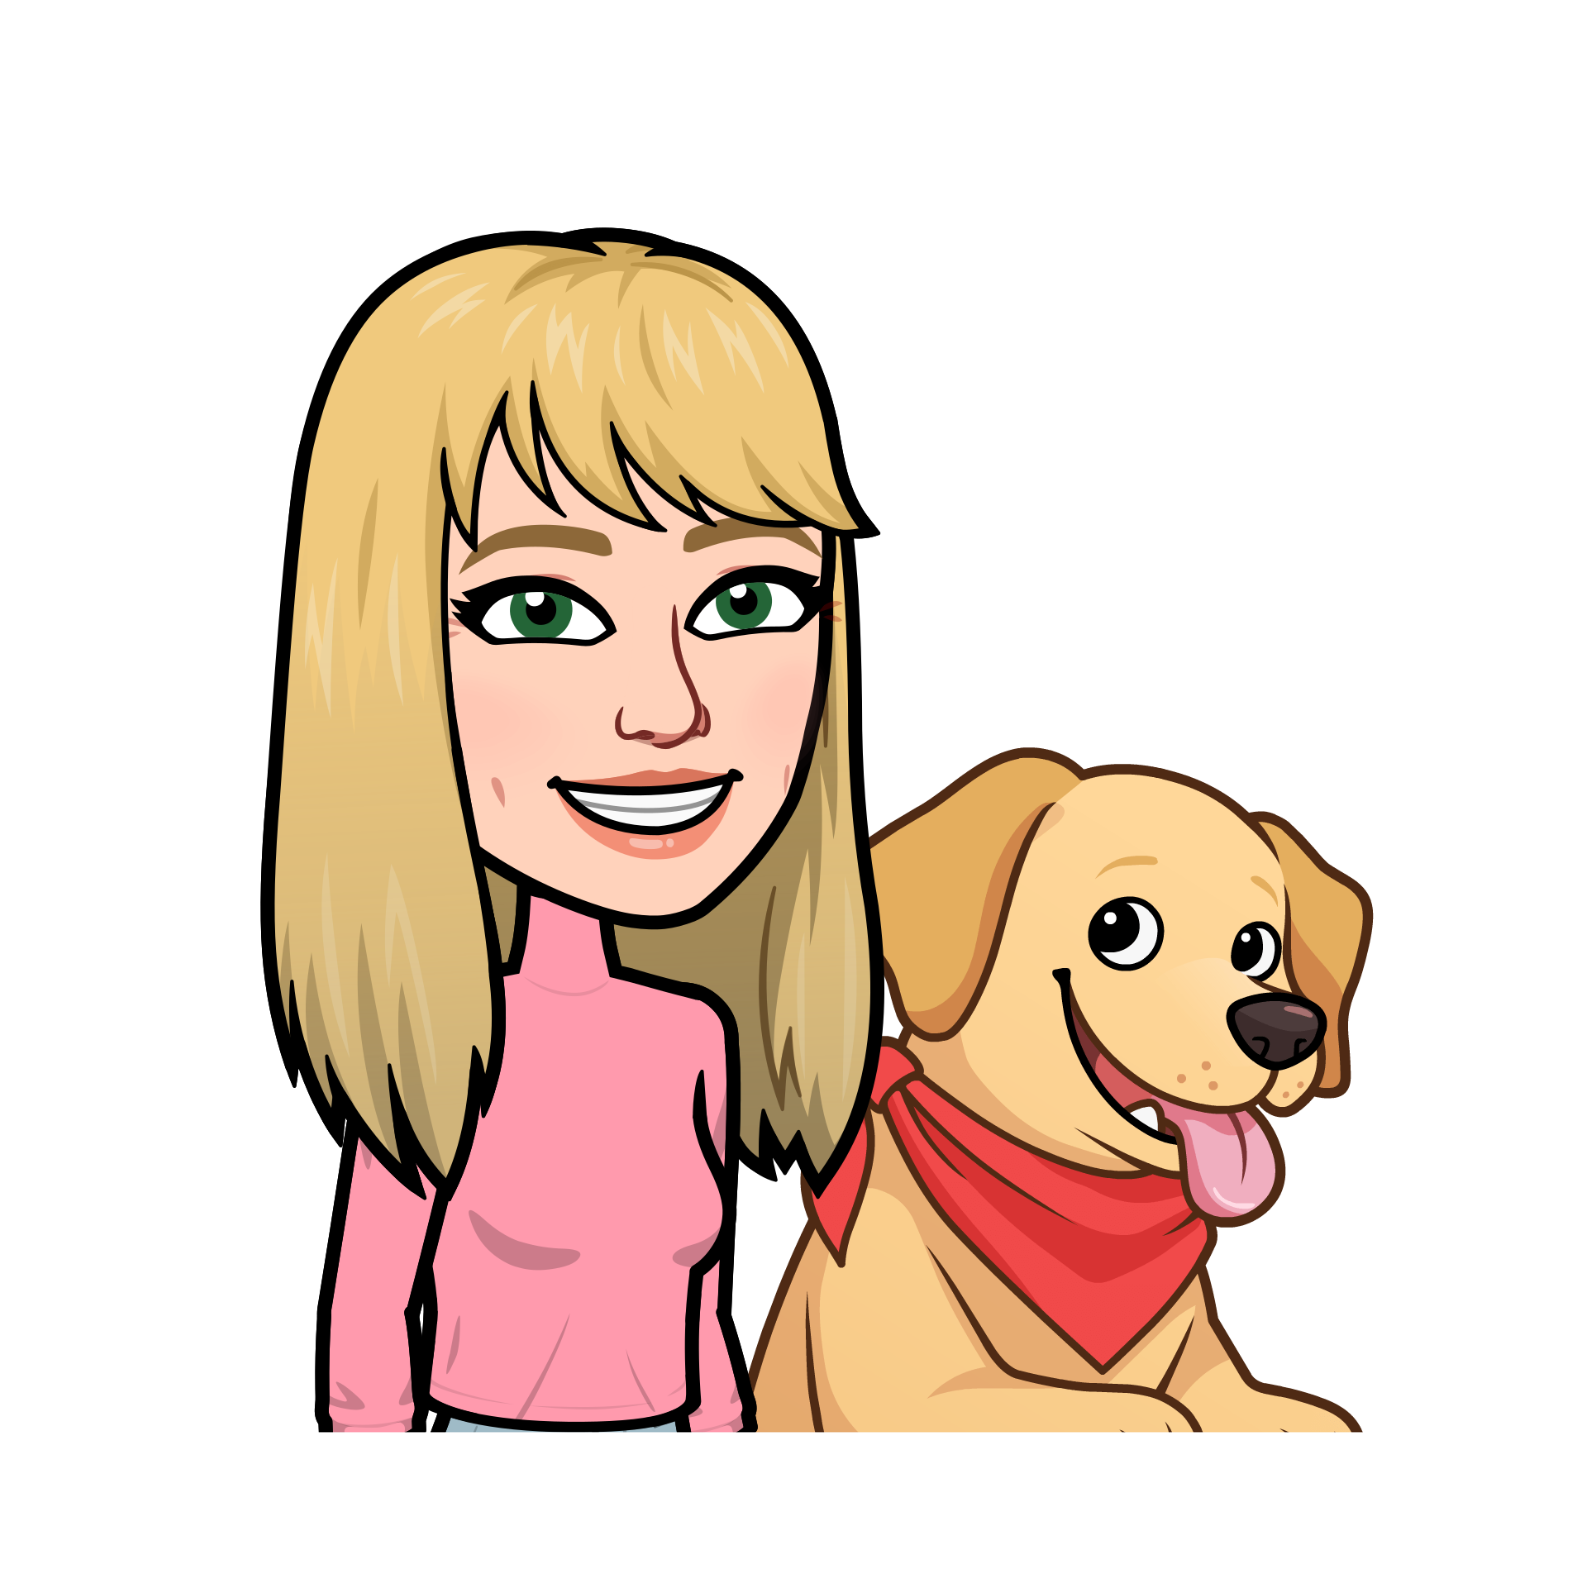 Cartoon image of a light-skinned woman with long blonde hair and bangs in a pink shirt. Beside her is a smiling yellow dog with its tongue hanging from its mouth wearing a red bandana around its neck.